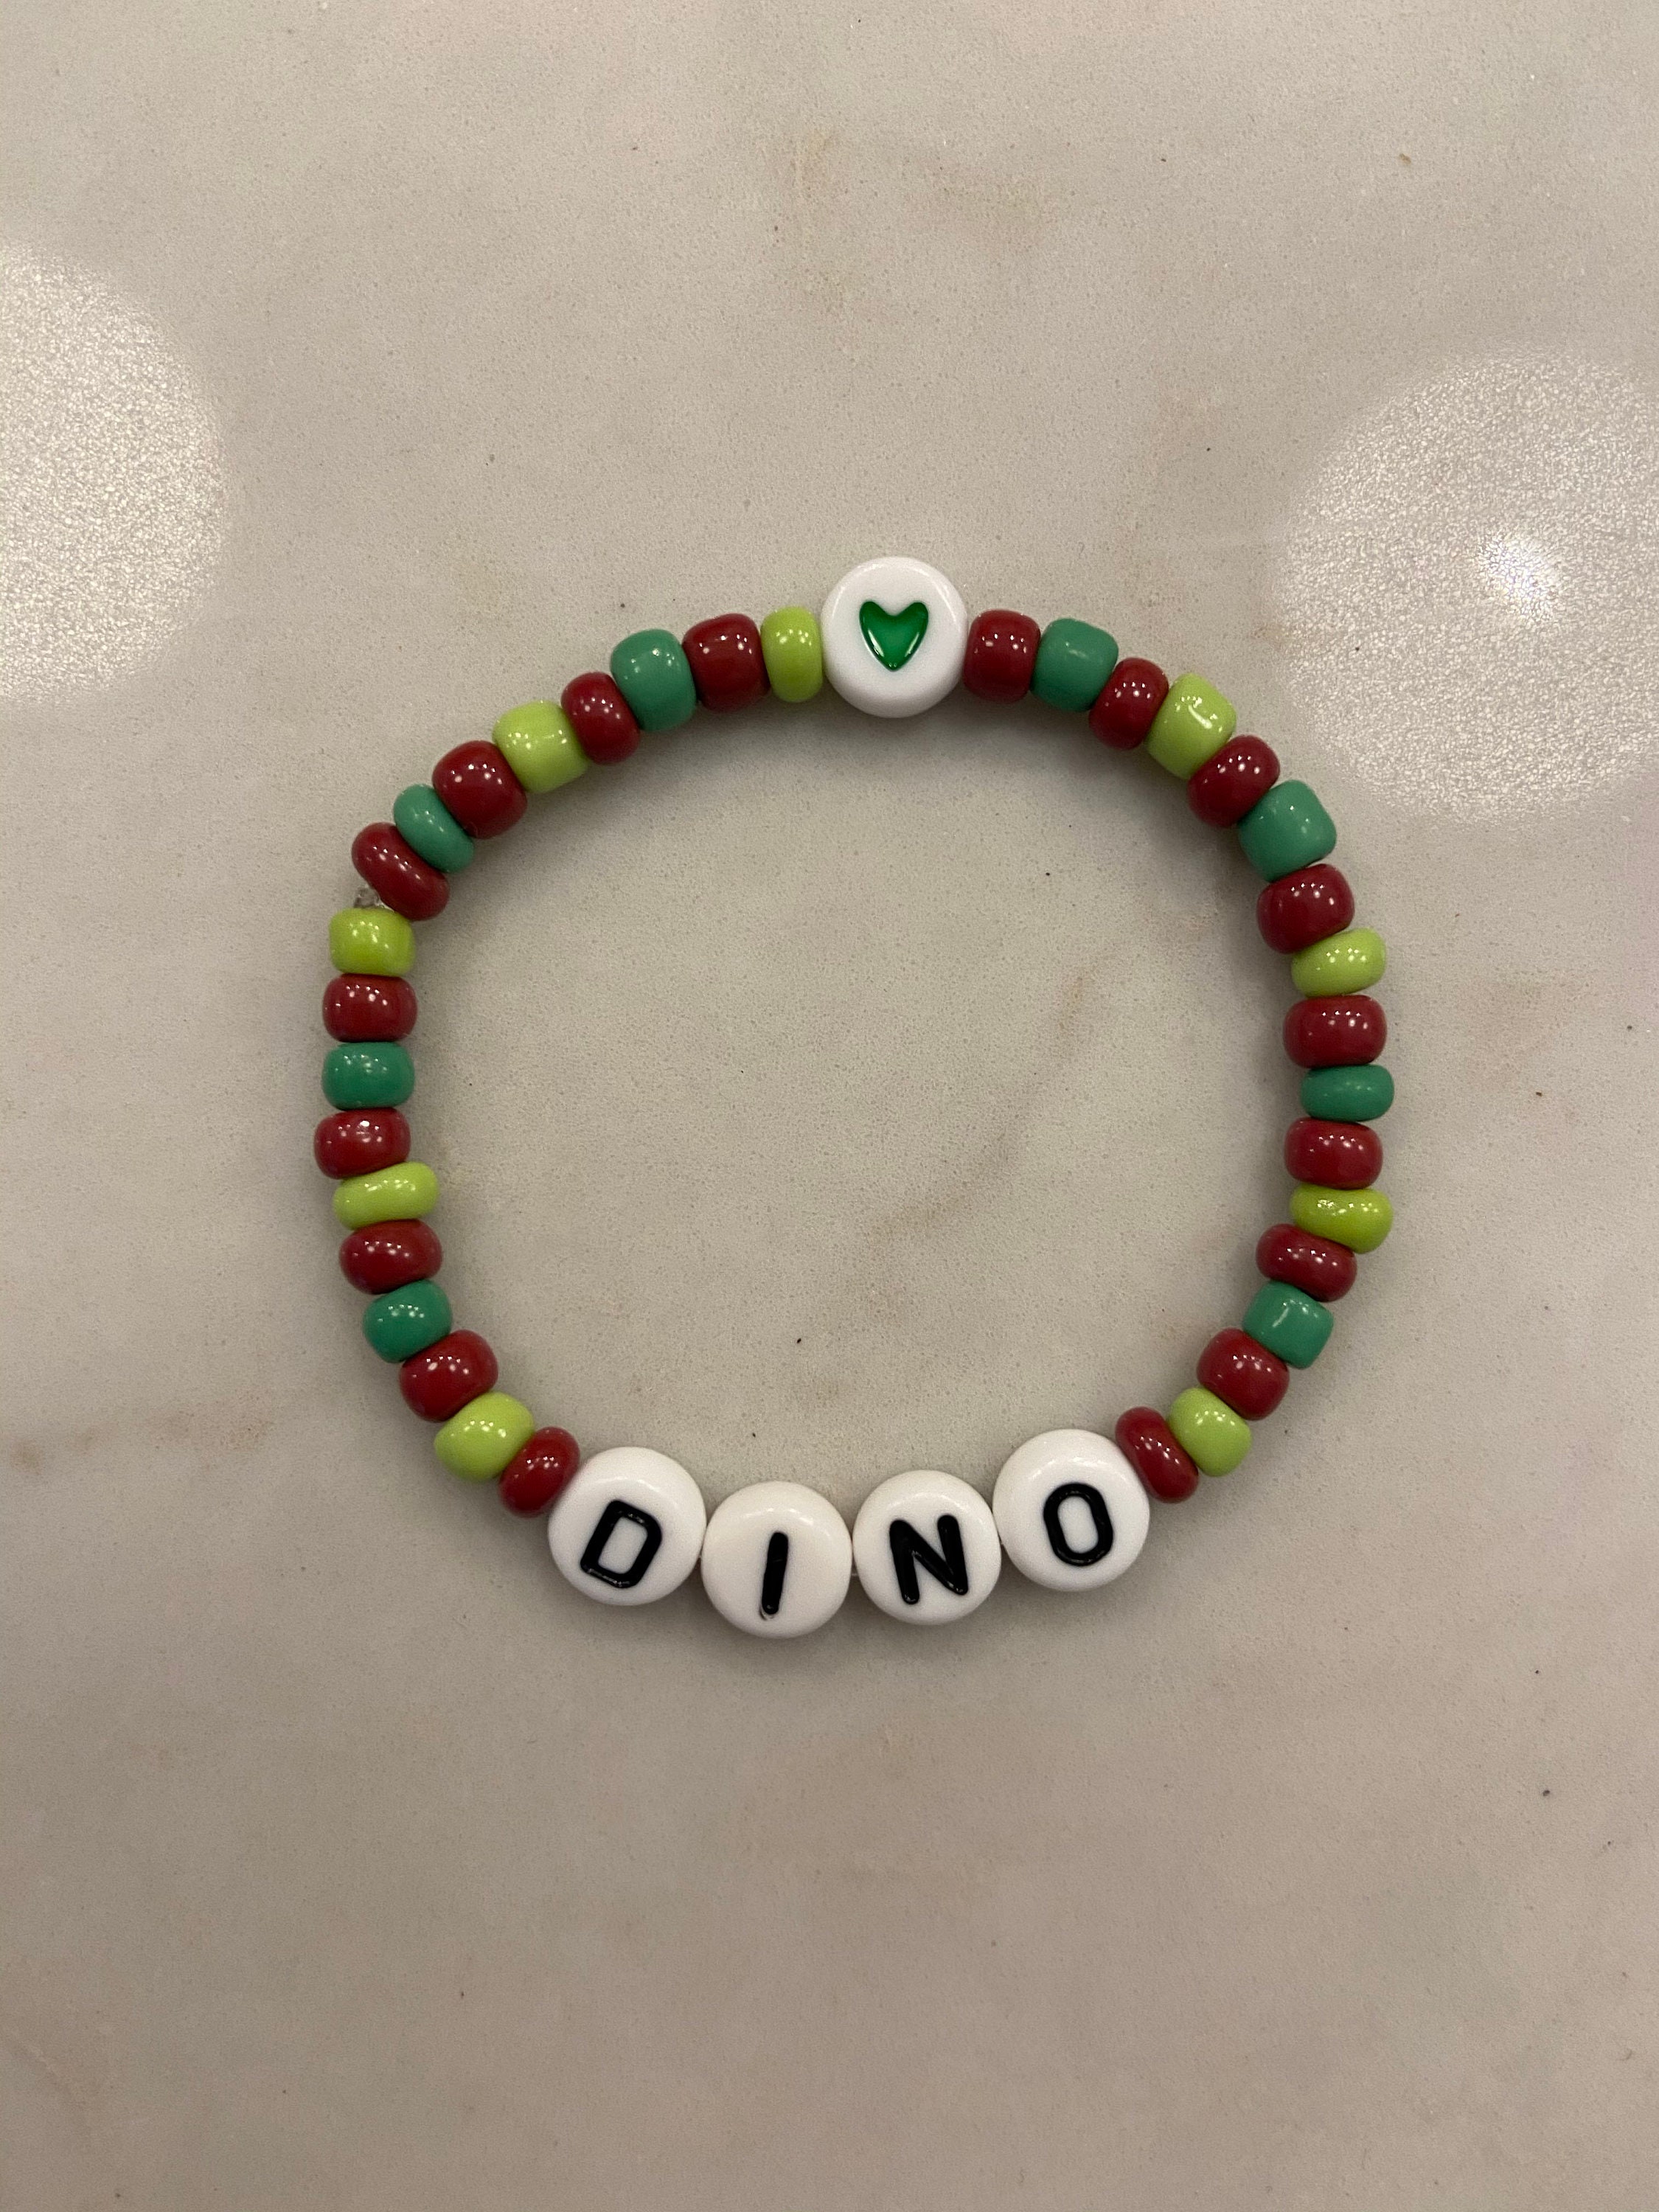 NS] Friendship Bracelets for the 5th Anniversary Show? :  r/NotAnotherDnDPodcast